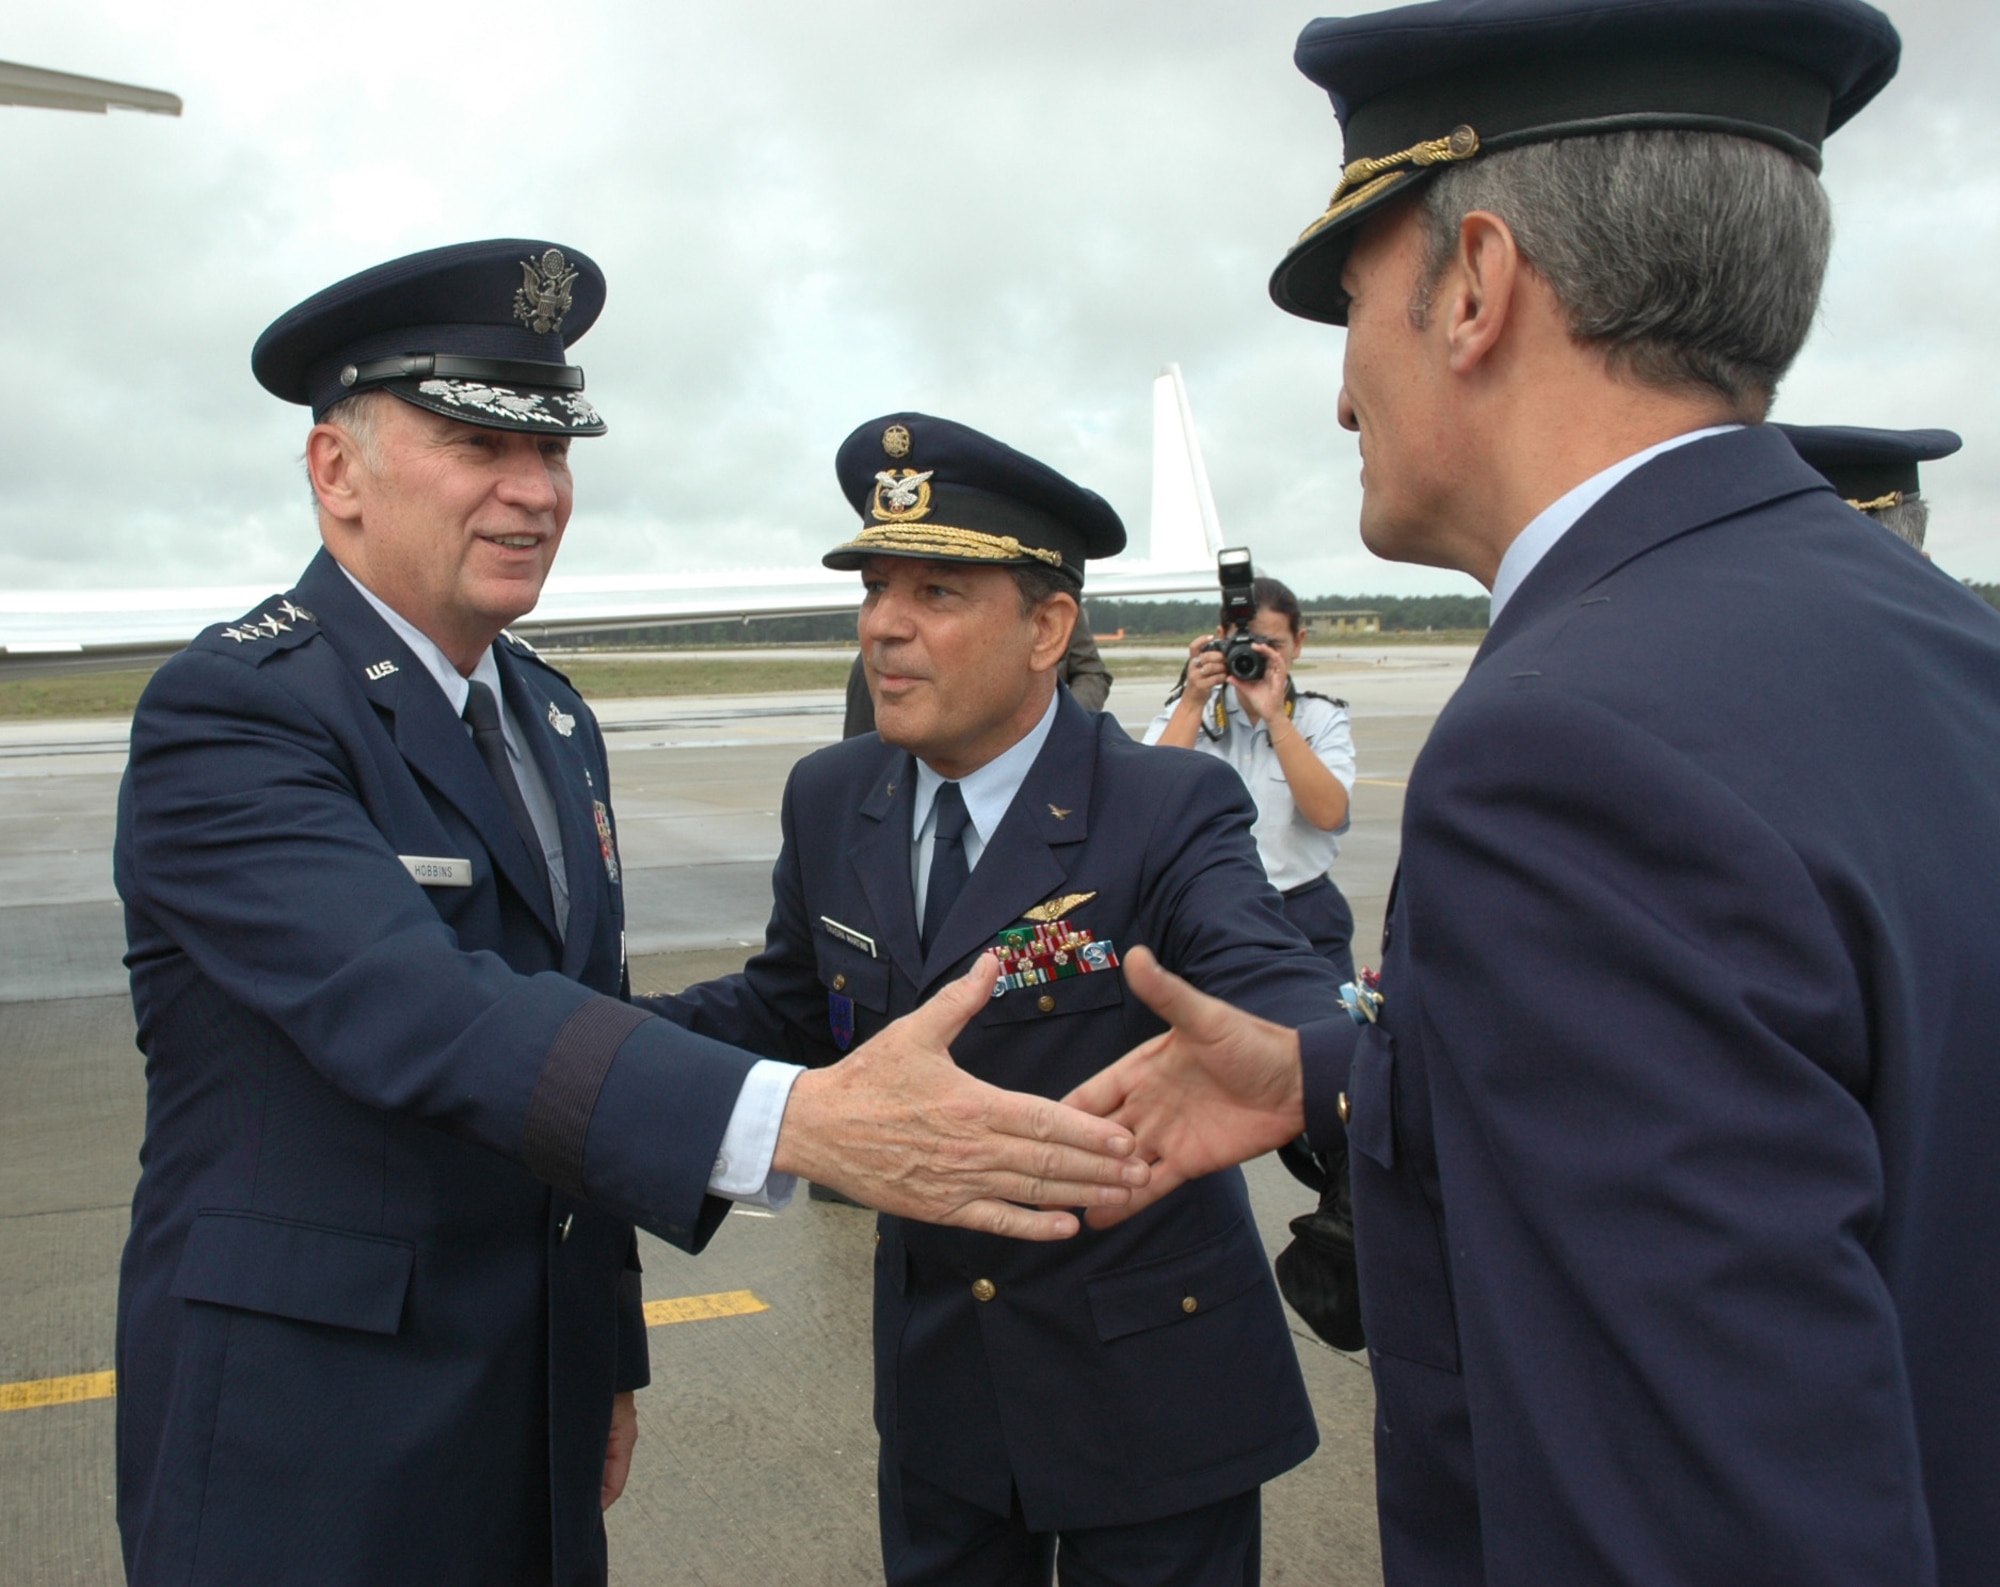 MONTE REAL AIR BASE, Portugal--Gen. Tom Hobbins (left), U.S. Air Forces in Europe commander, is introduced to Portuguese Colonel Joao Luis Ramirez de Carvalho Cordeiro, Monte Real Air Base commander, by Portuguese General Manuel Jose Taveira Martins, Portuguese Air Force Chief of Staff, during a base visit Sep. 29. (U.S. Air Force Photo/Capt. Elizabeth Culbertson)